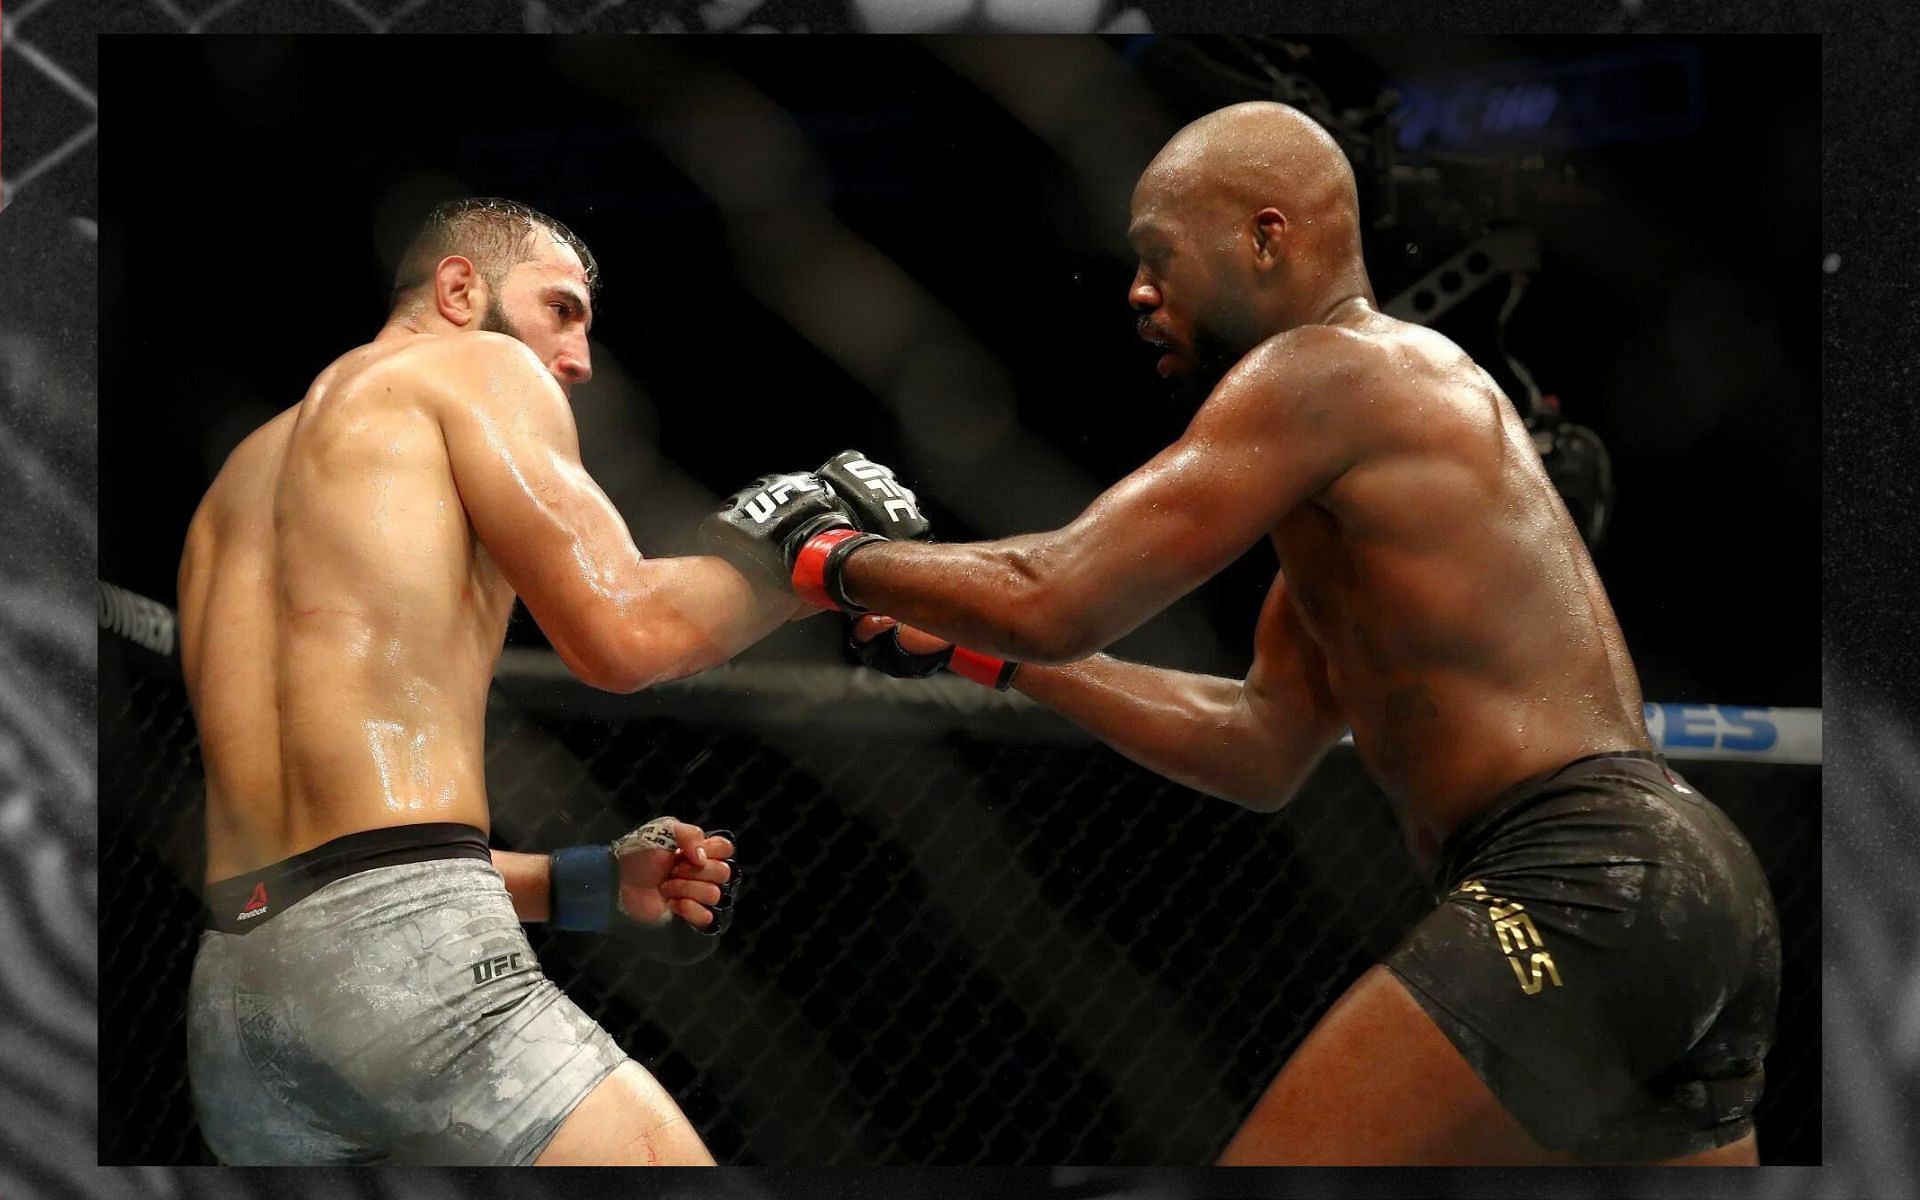 Jon Jones (right) and Dominick Reyes (left) in action at UFC 247. [Image courtesy: Getty Images]